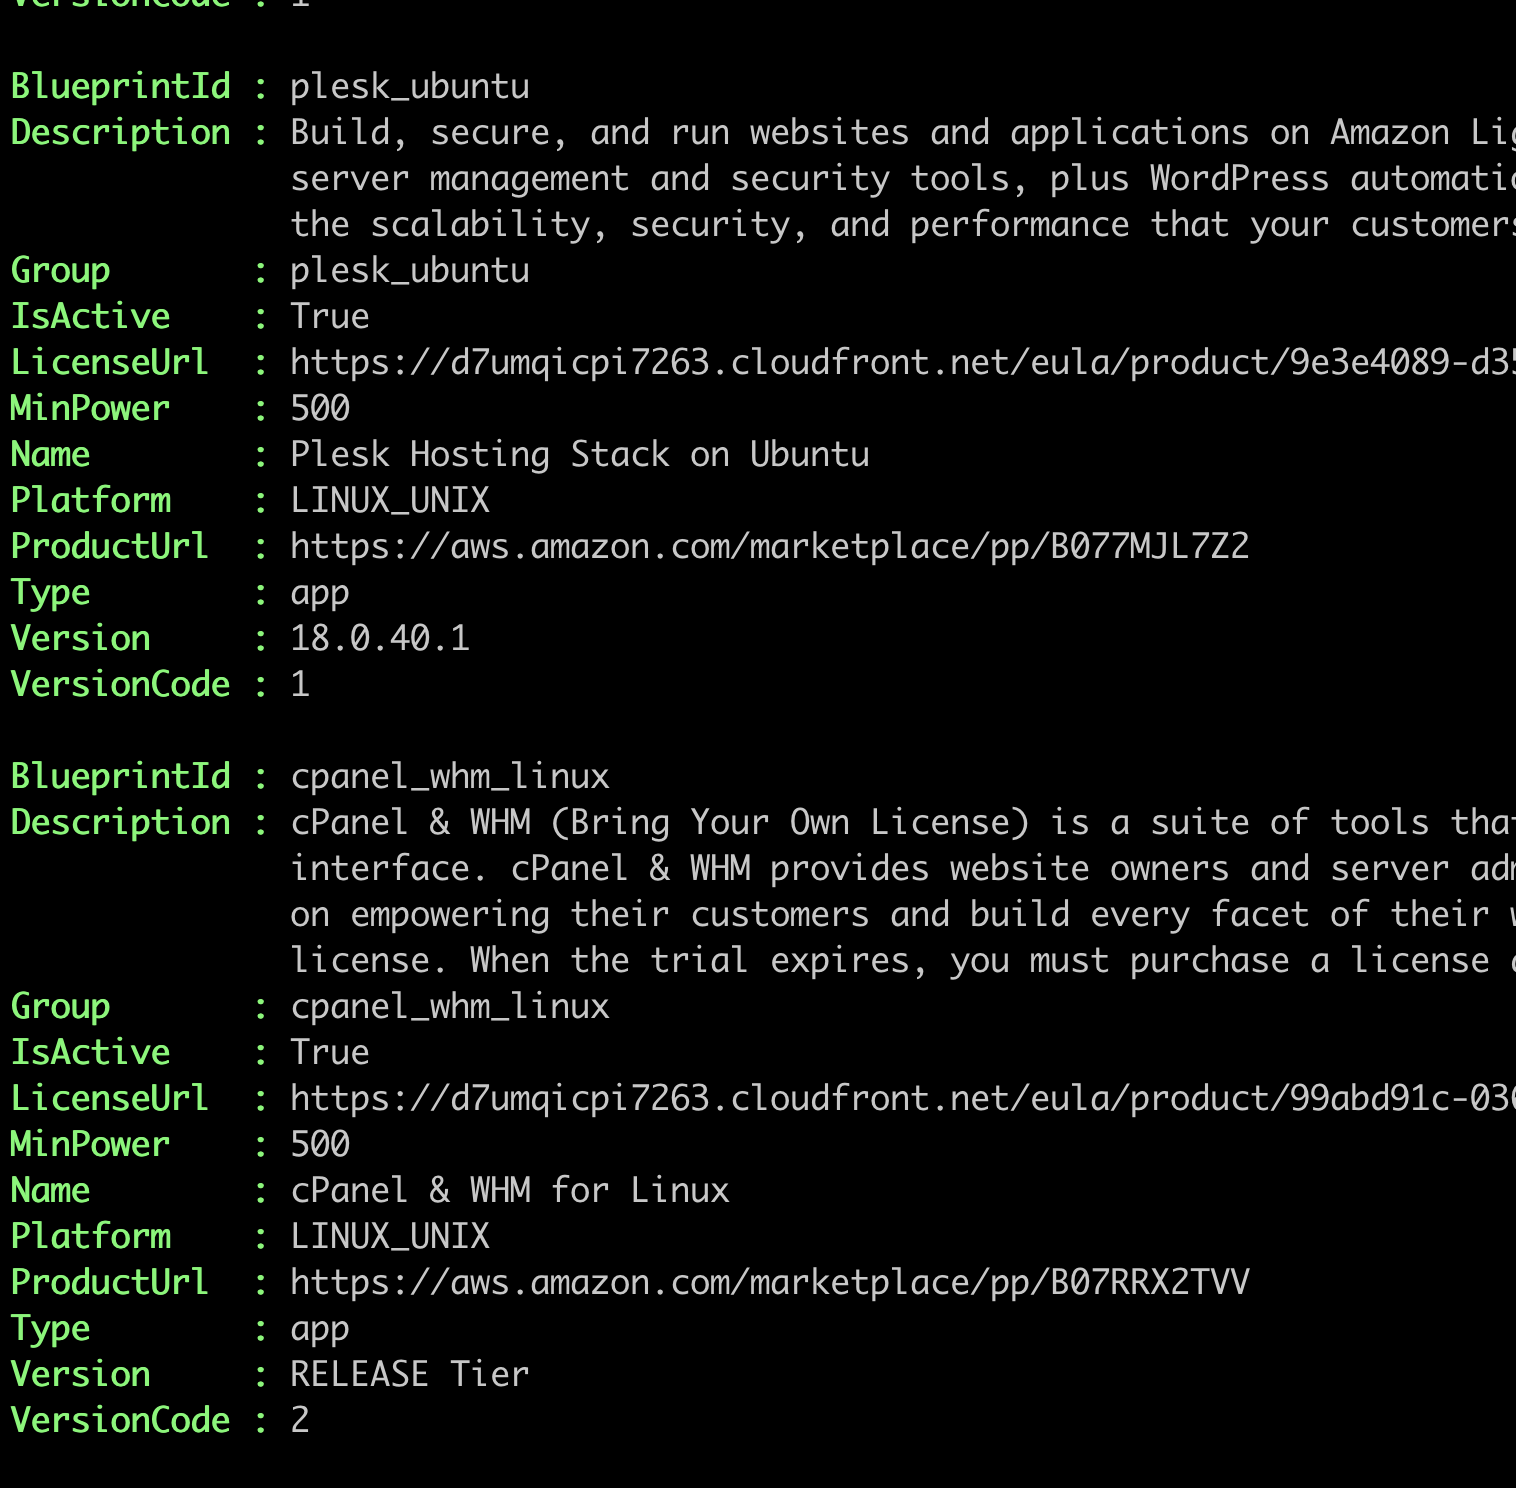 Screenshot of the terminal showing the results of Get-LSBlueprintList cmdlet